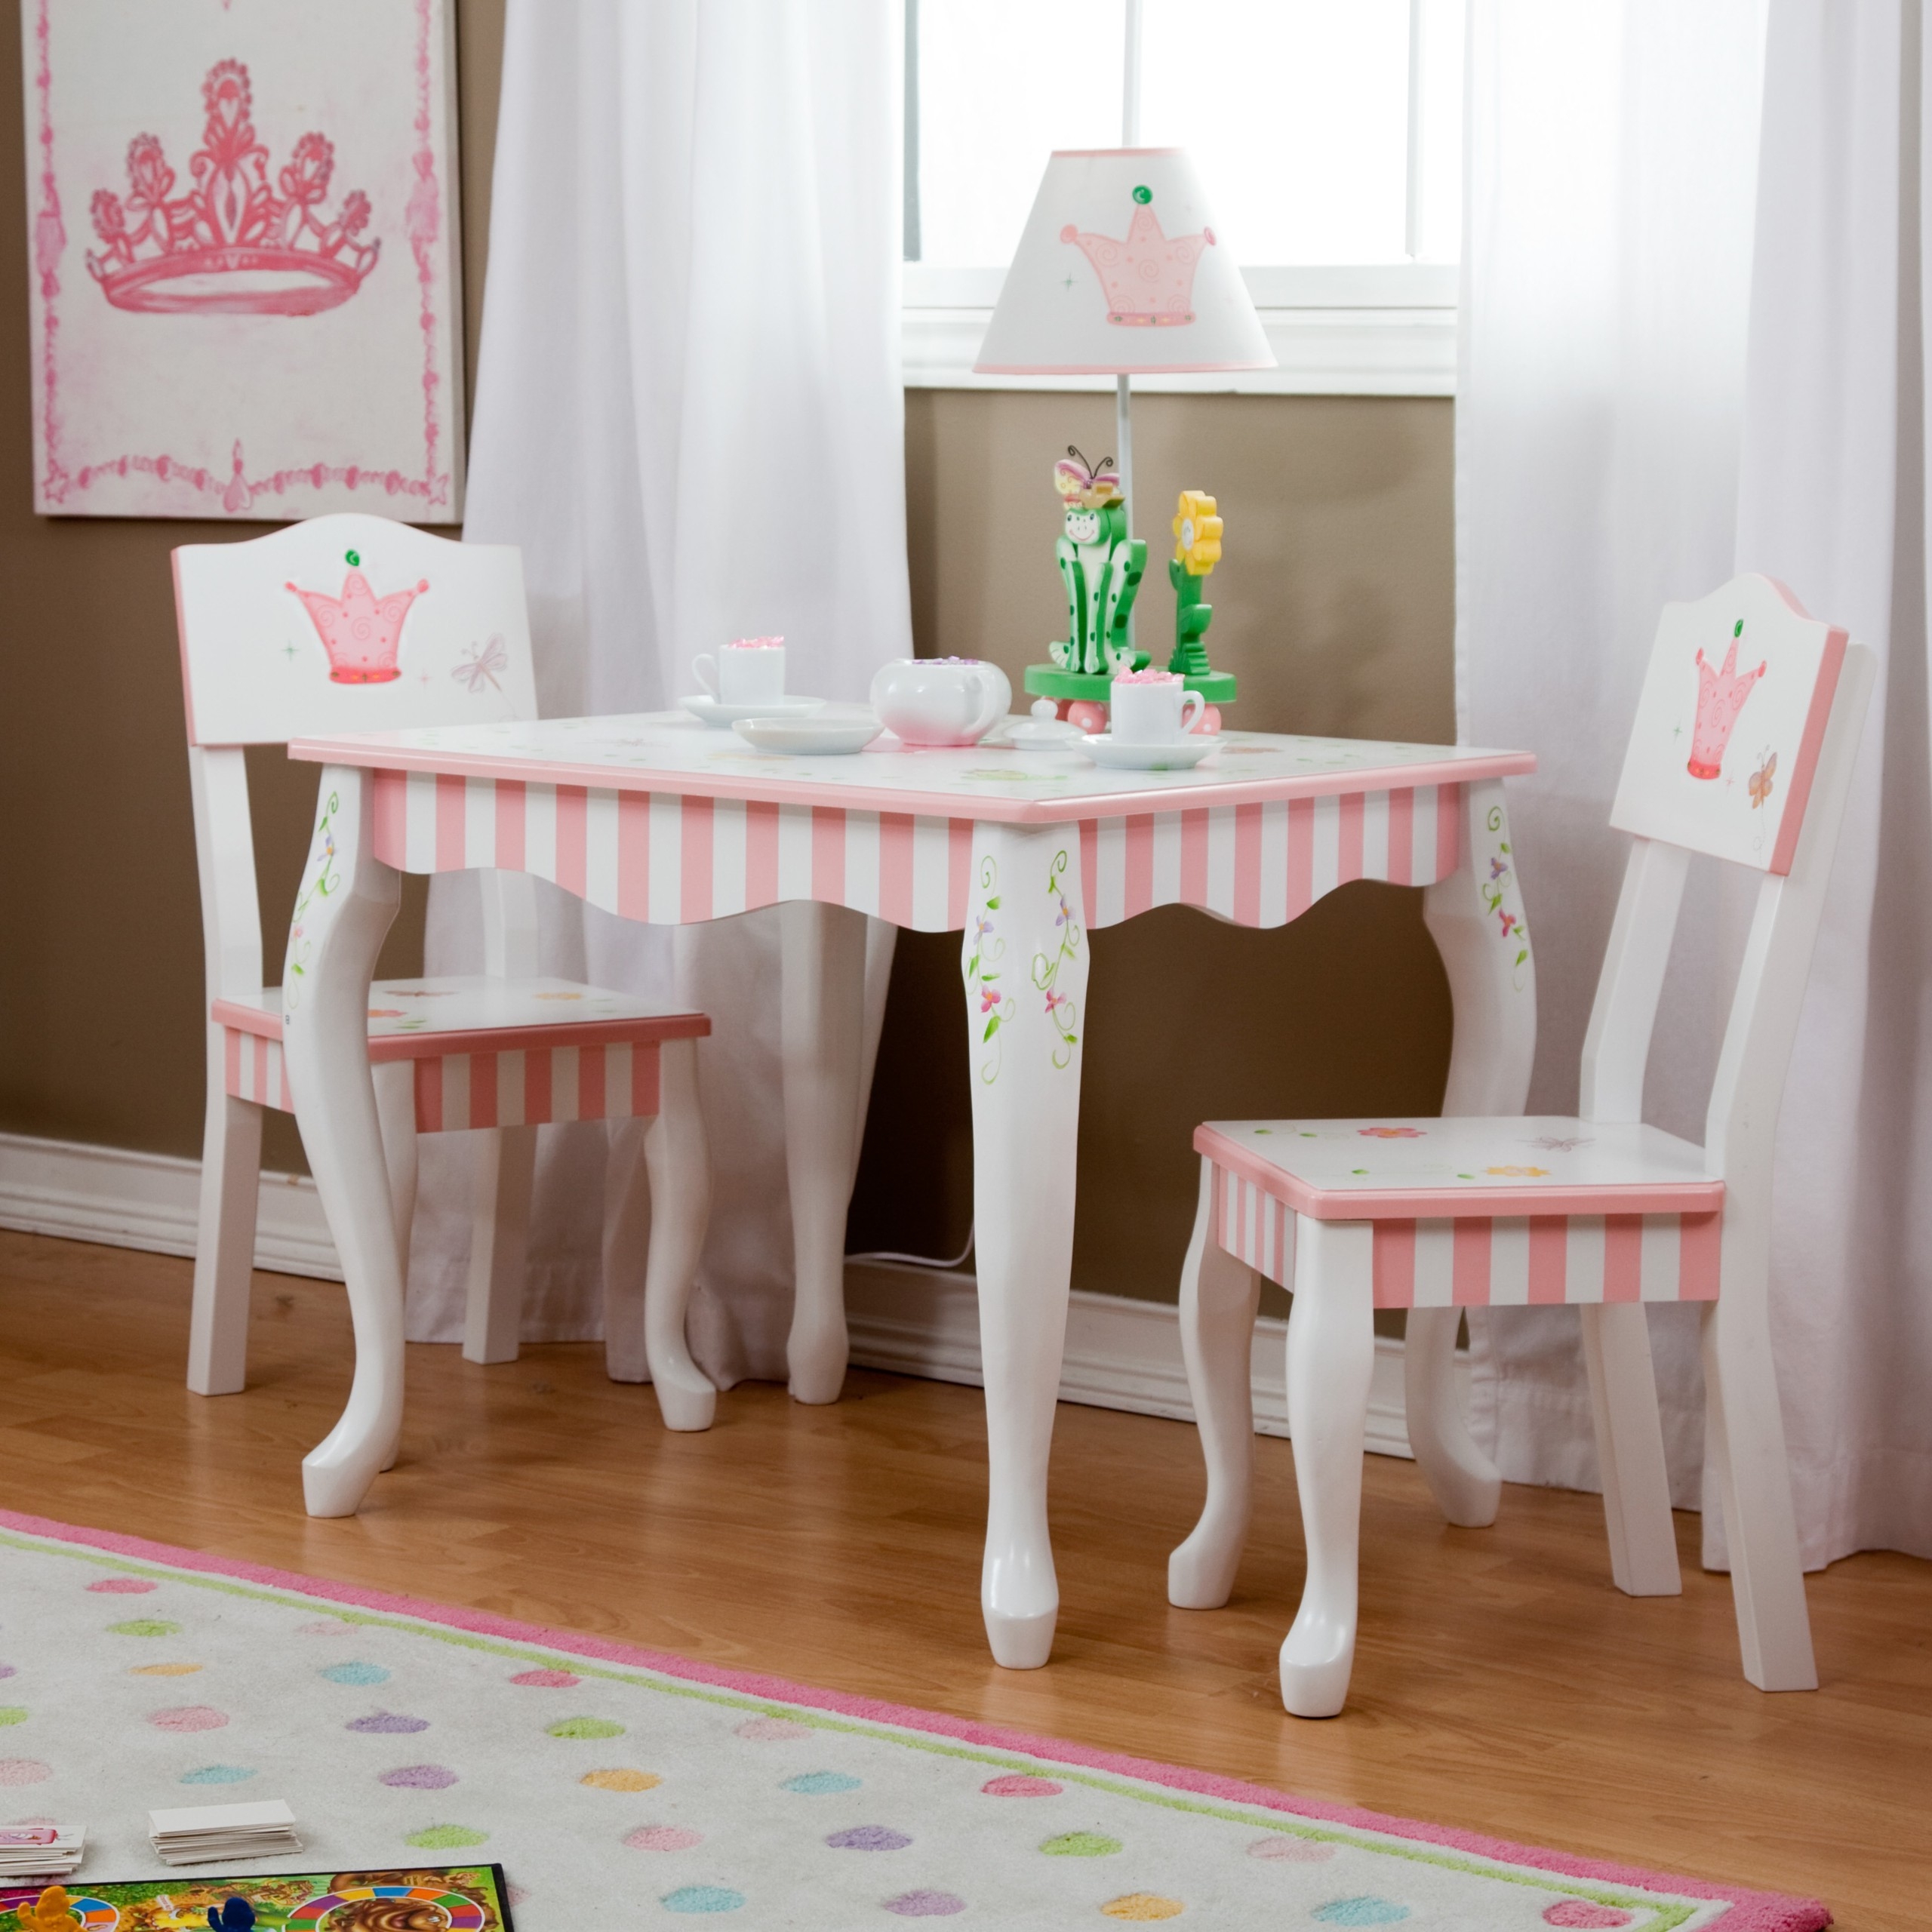 NEW Style Childrens Wooden Table and Chair set Kids Toddlers Childs Art Theme 